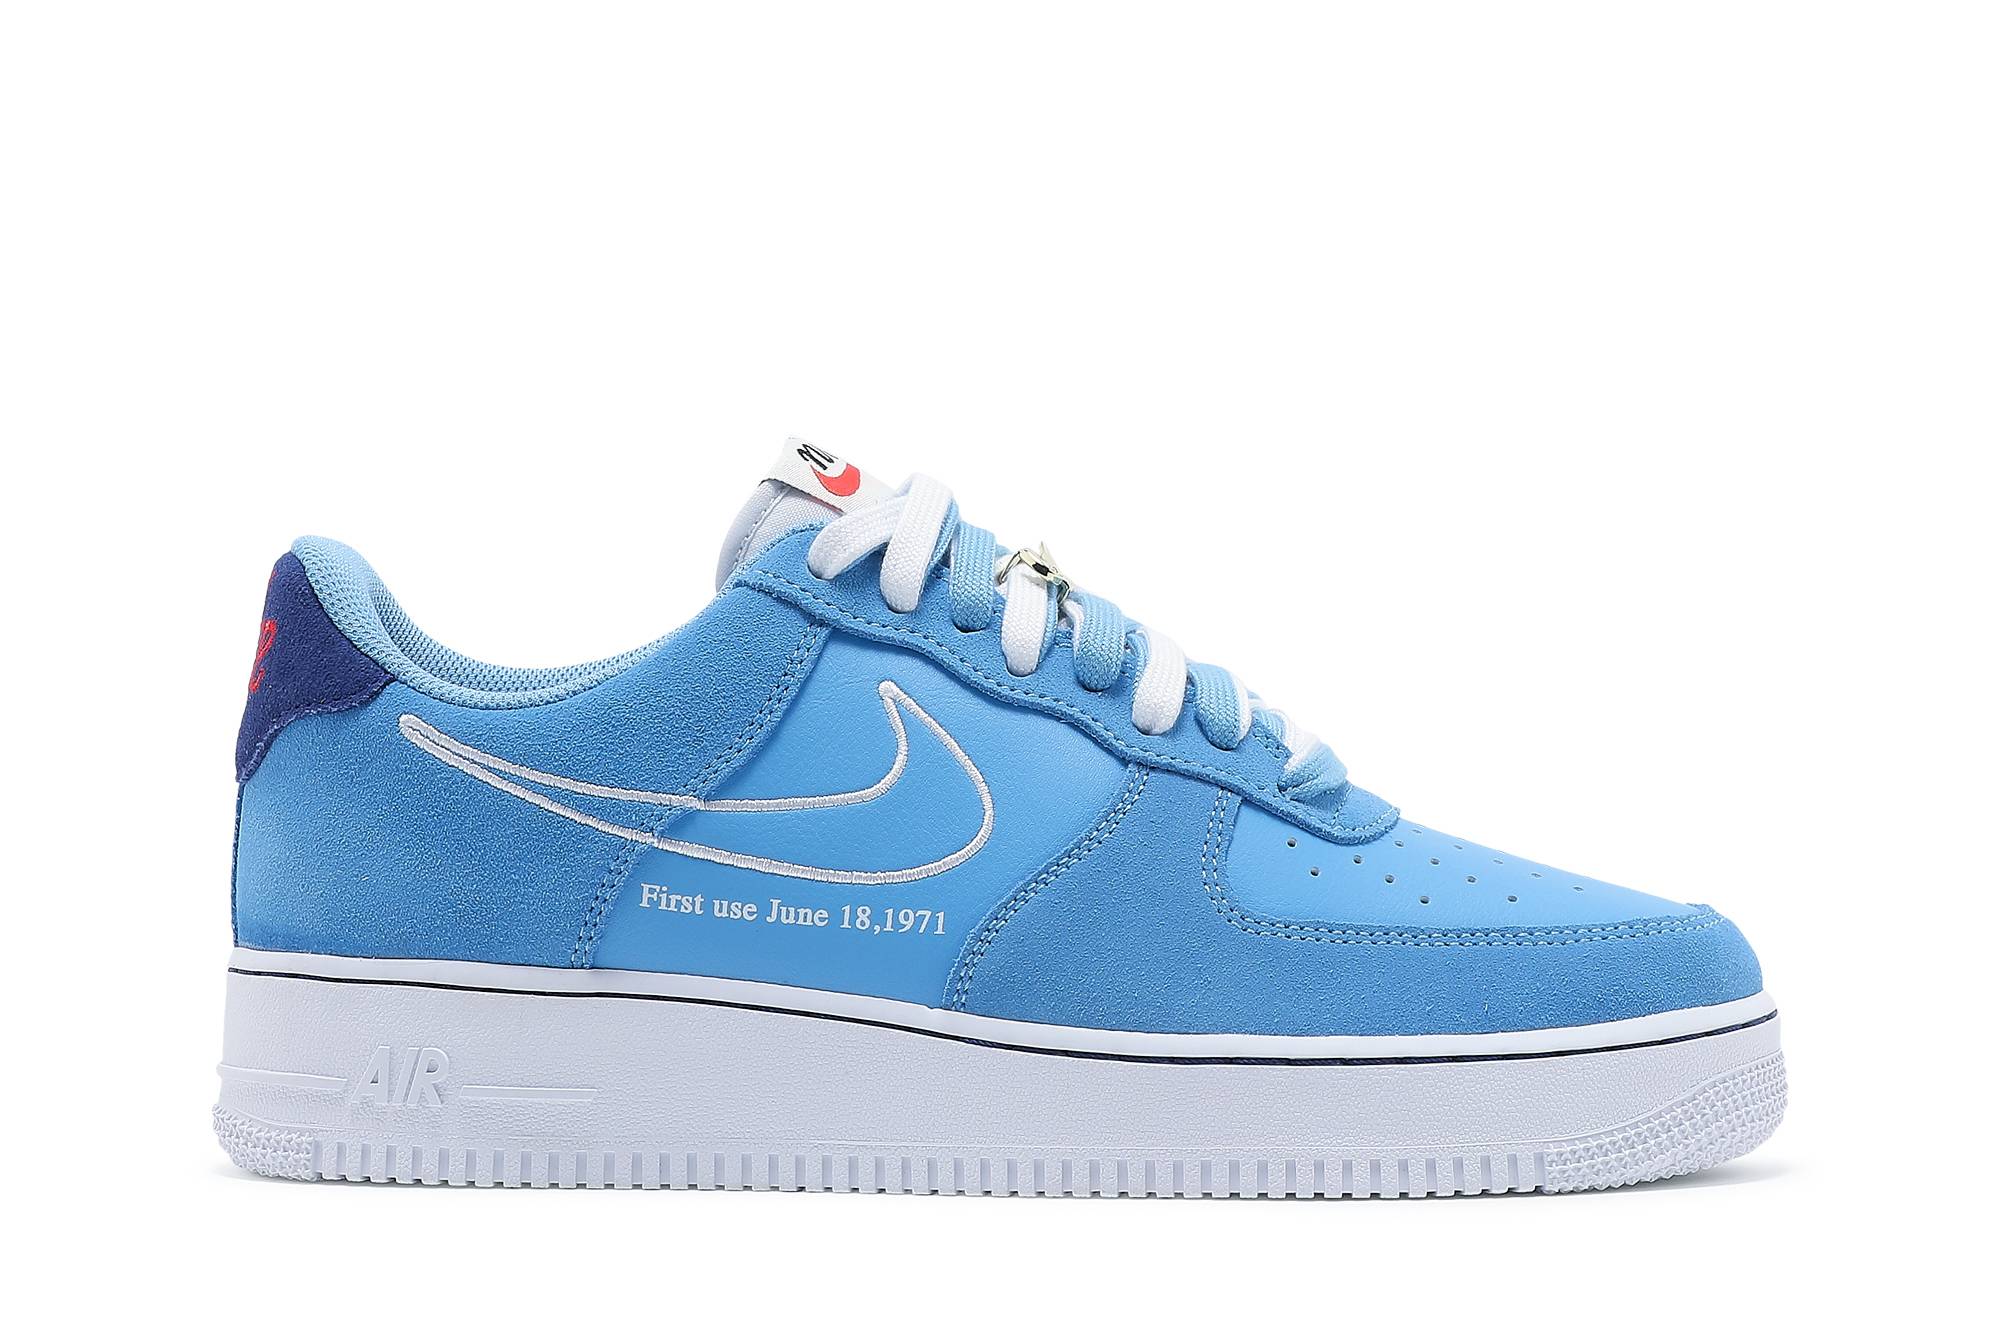 Nike Air Force 1 Low 'First Use University Blue' (DB3597-400)